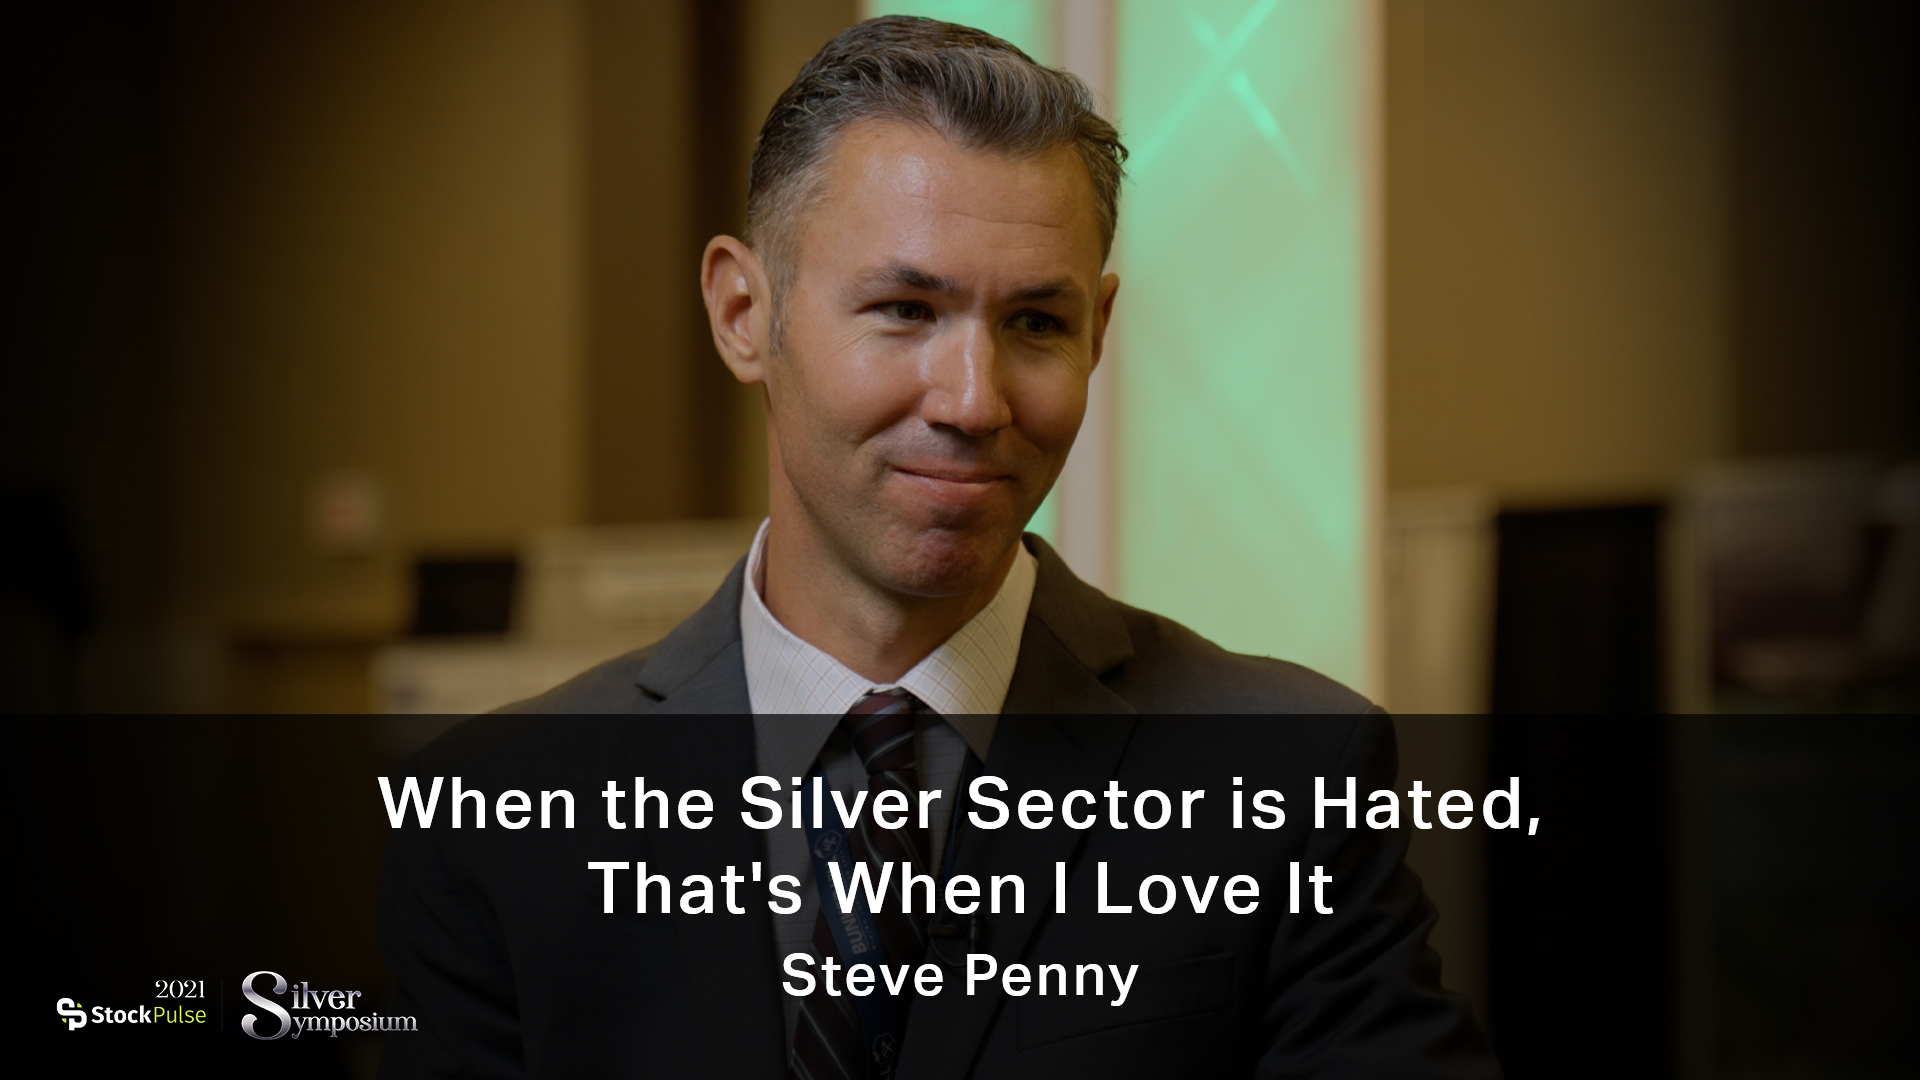 Steve Penny: When the Silver Sector is Hated, That’s When I Love It